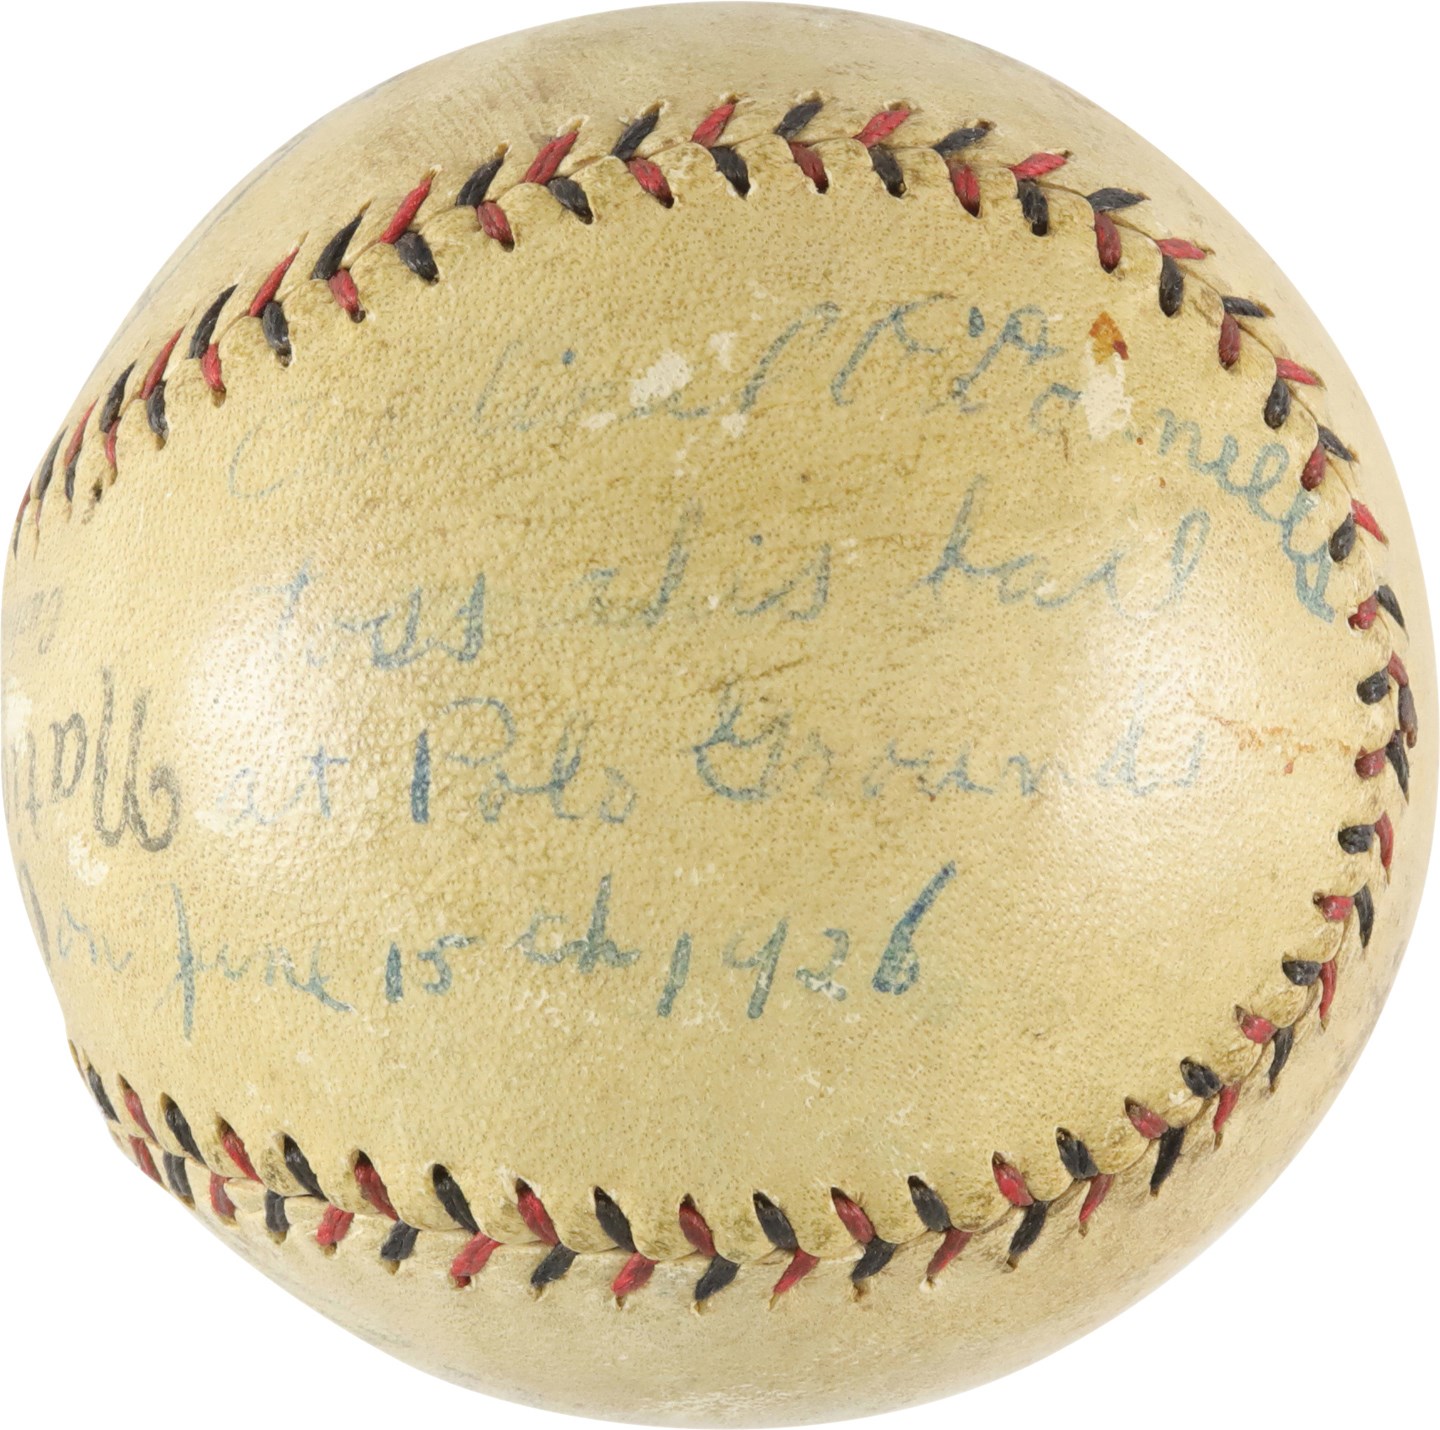 - June 15th, 1926, Cardinal Patrick O'Donnell First Pitch Baseball (ex-Jimmy Ring Collection)